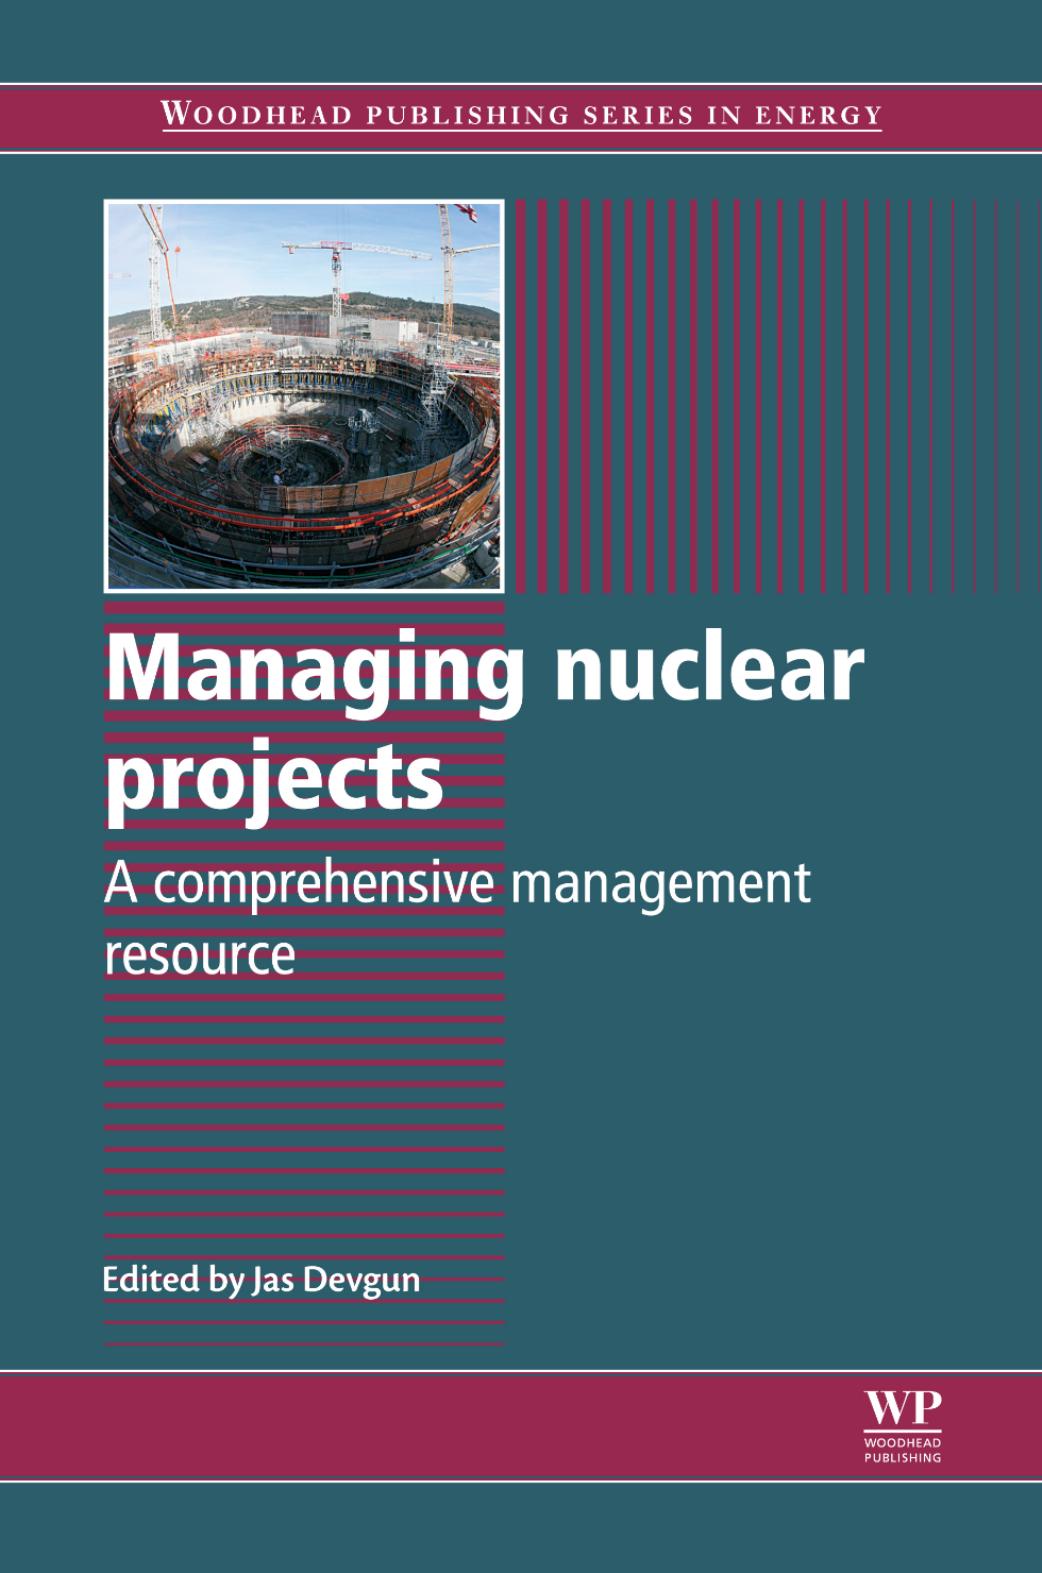 060. Managing Nuclear Projects by A Comprehensive Management Resource (2013)